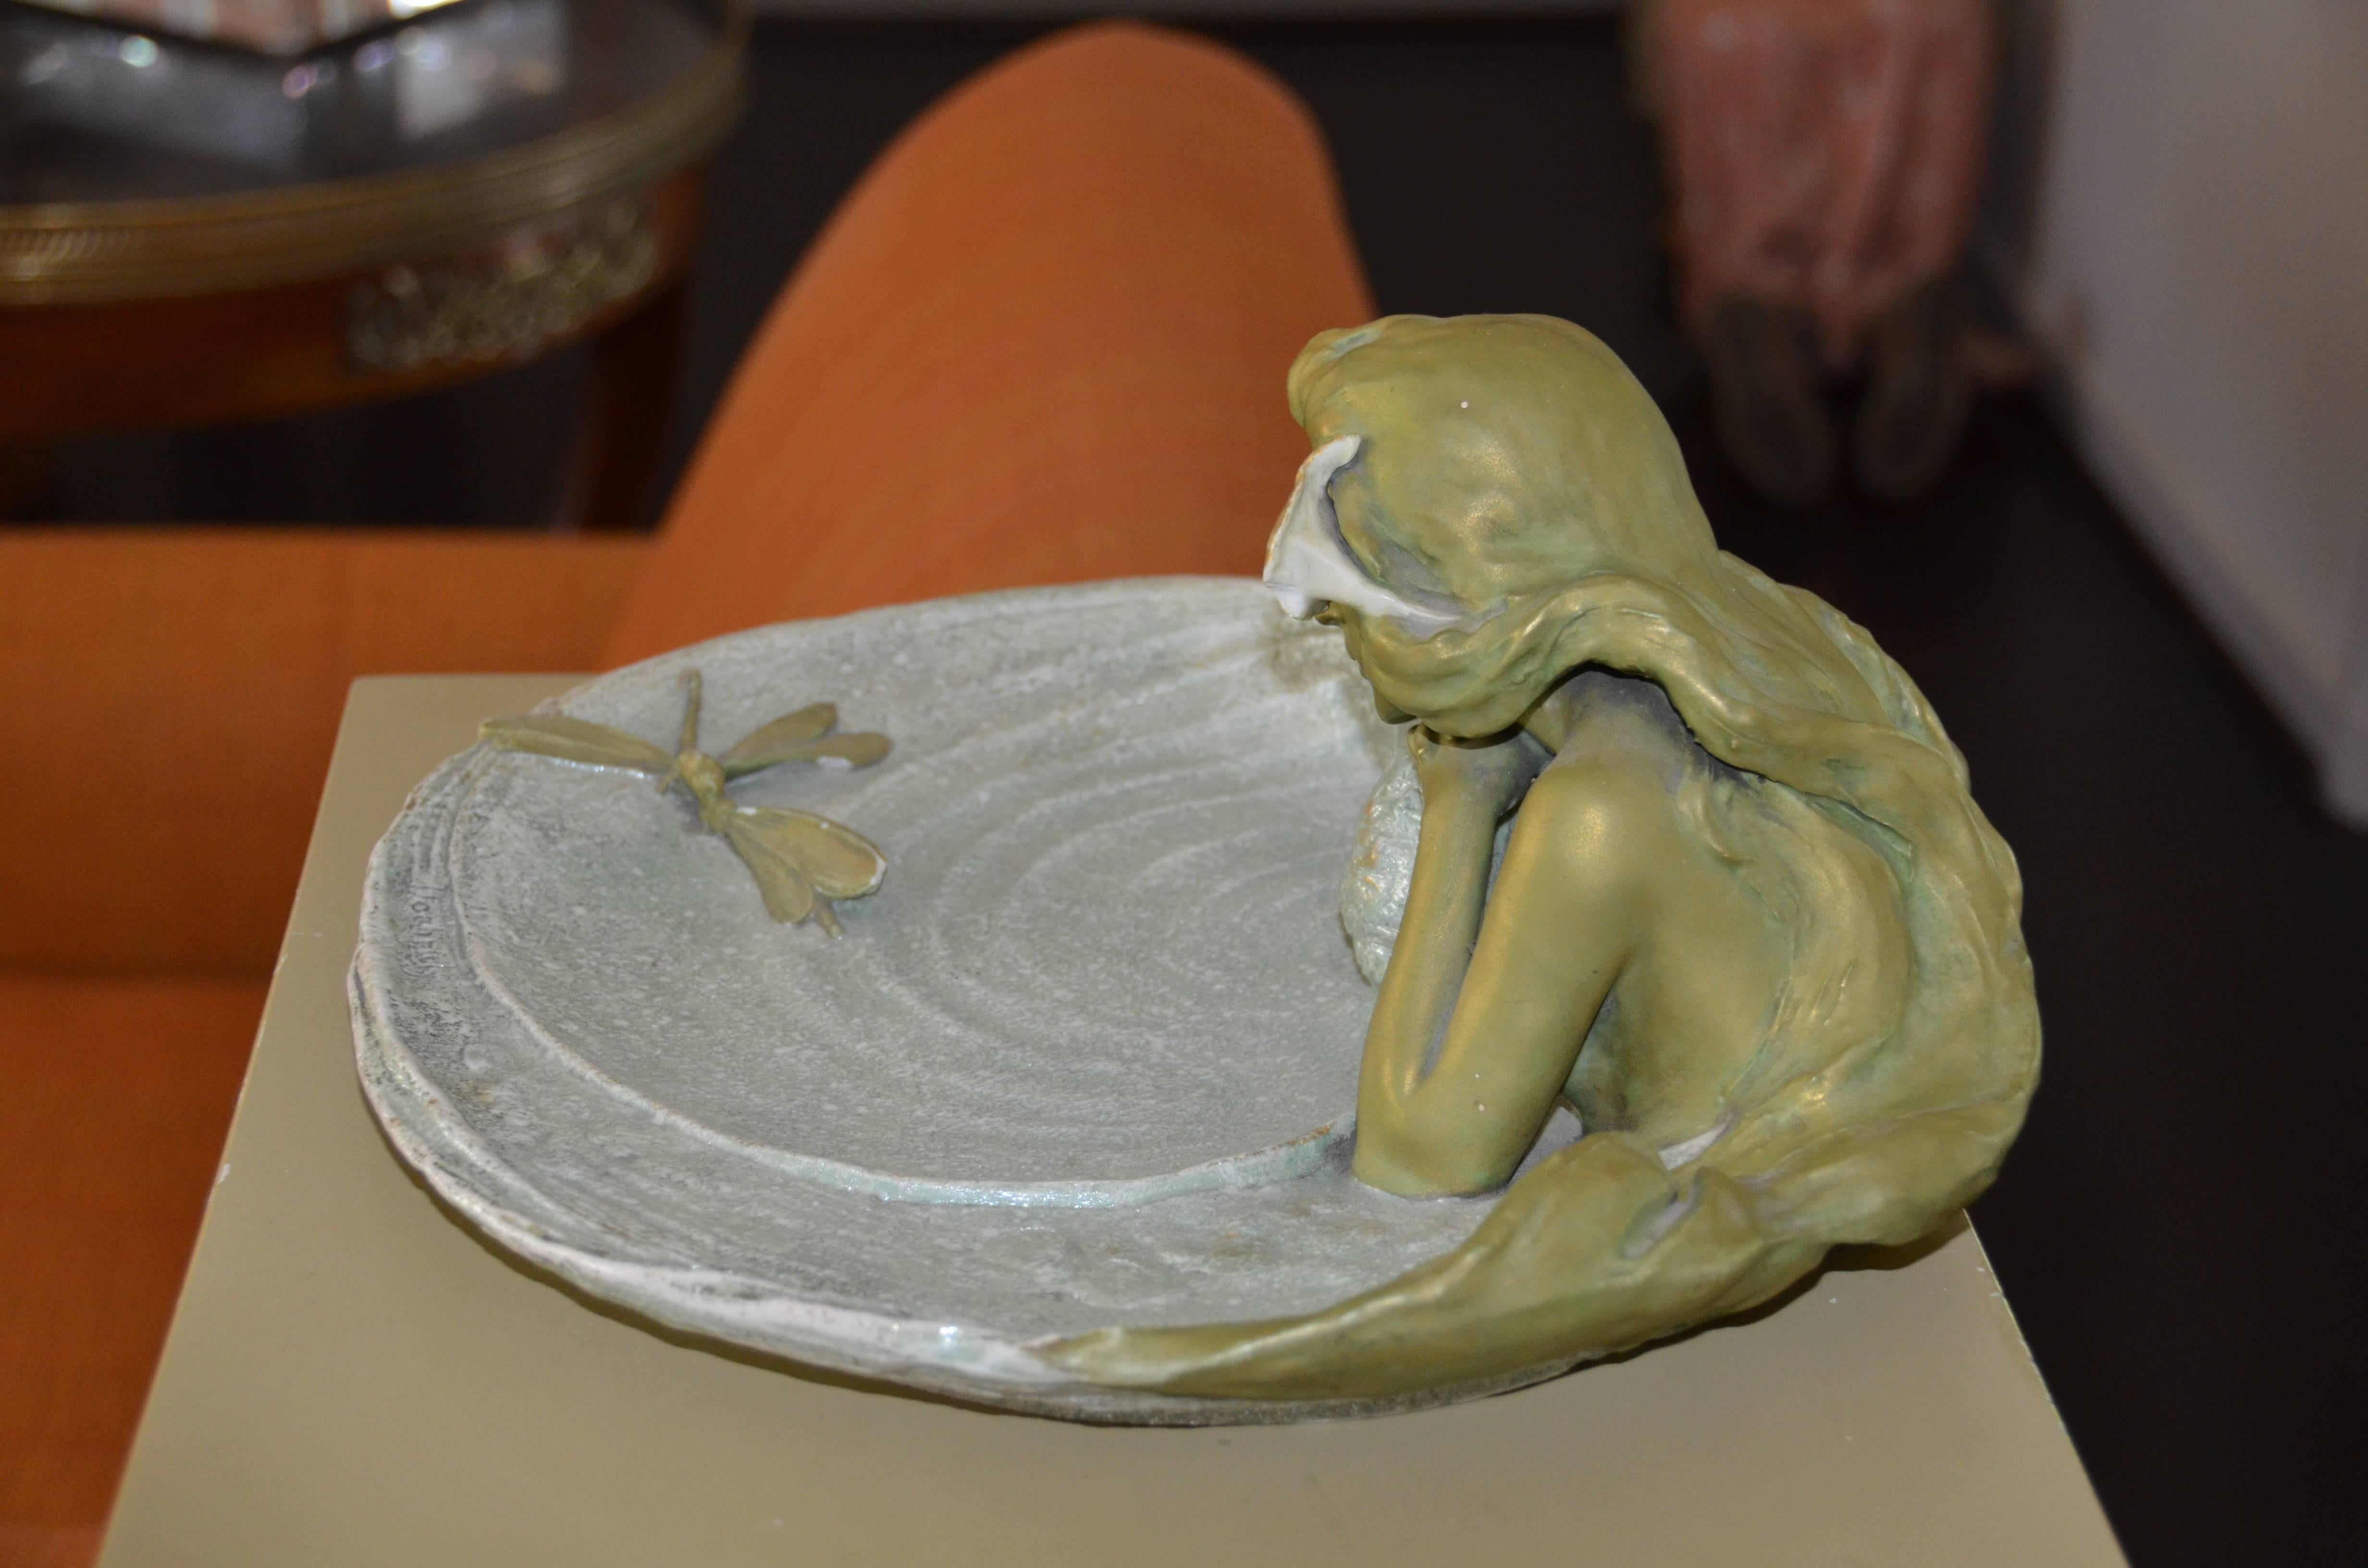 19th Century Art Nouveau Nymph Dragonfly Ceramic Iridescent Art Platter circa 1890 Signed For Sale